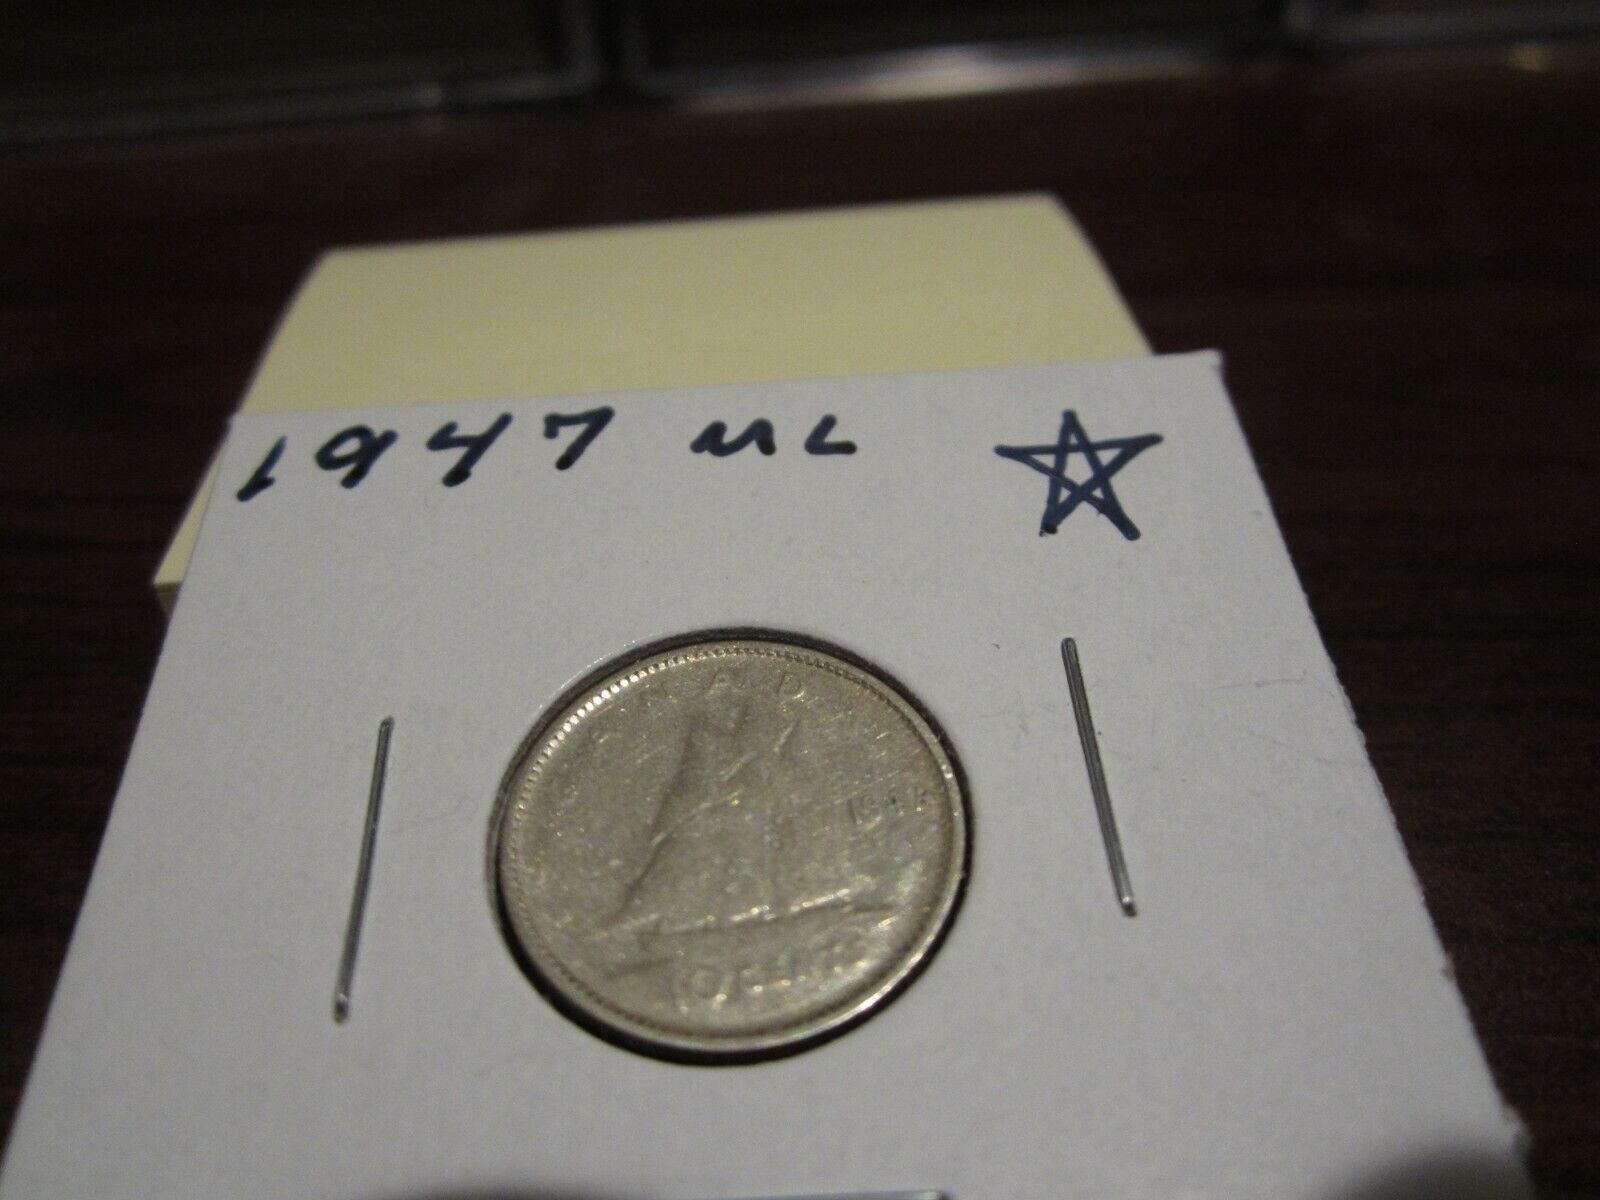 1947 Ml - Canada 10 Cent - Canadian Dime